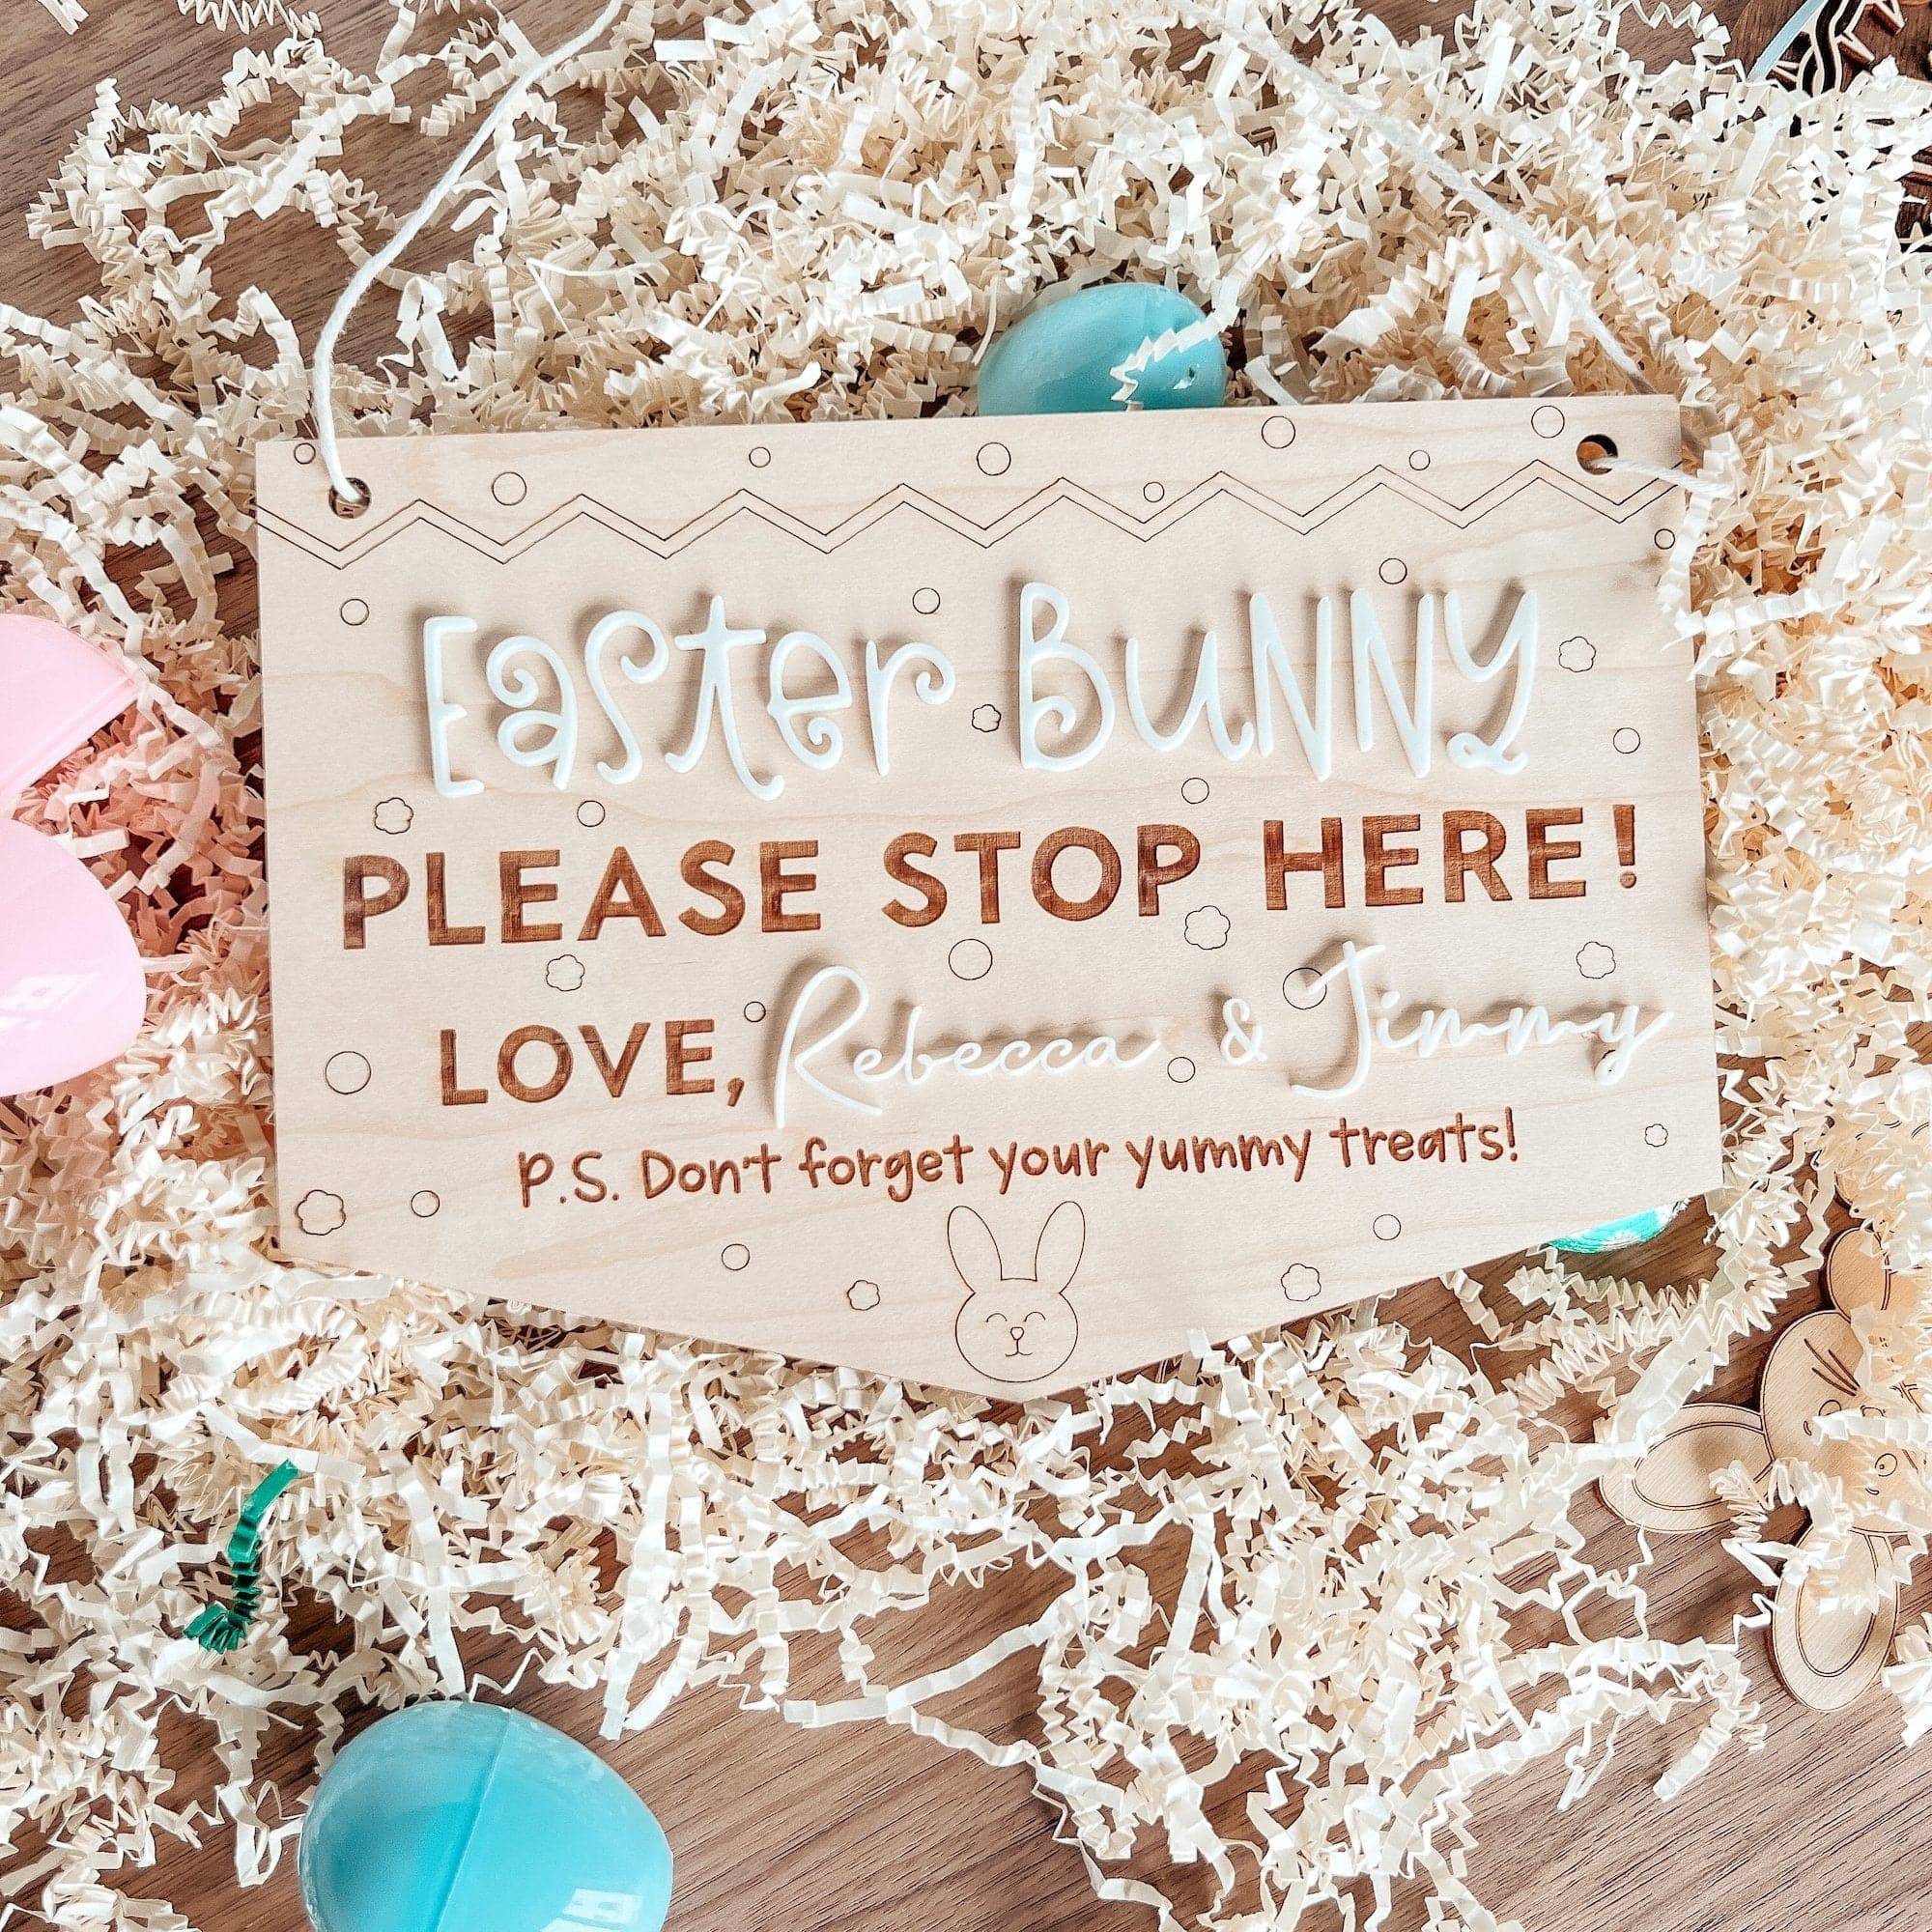 Easter Bunny Please Stop Here Personalized Wood Sign - Sticks & Doodles